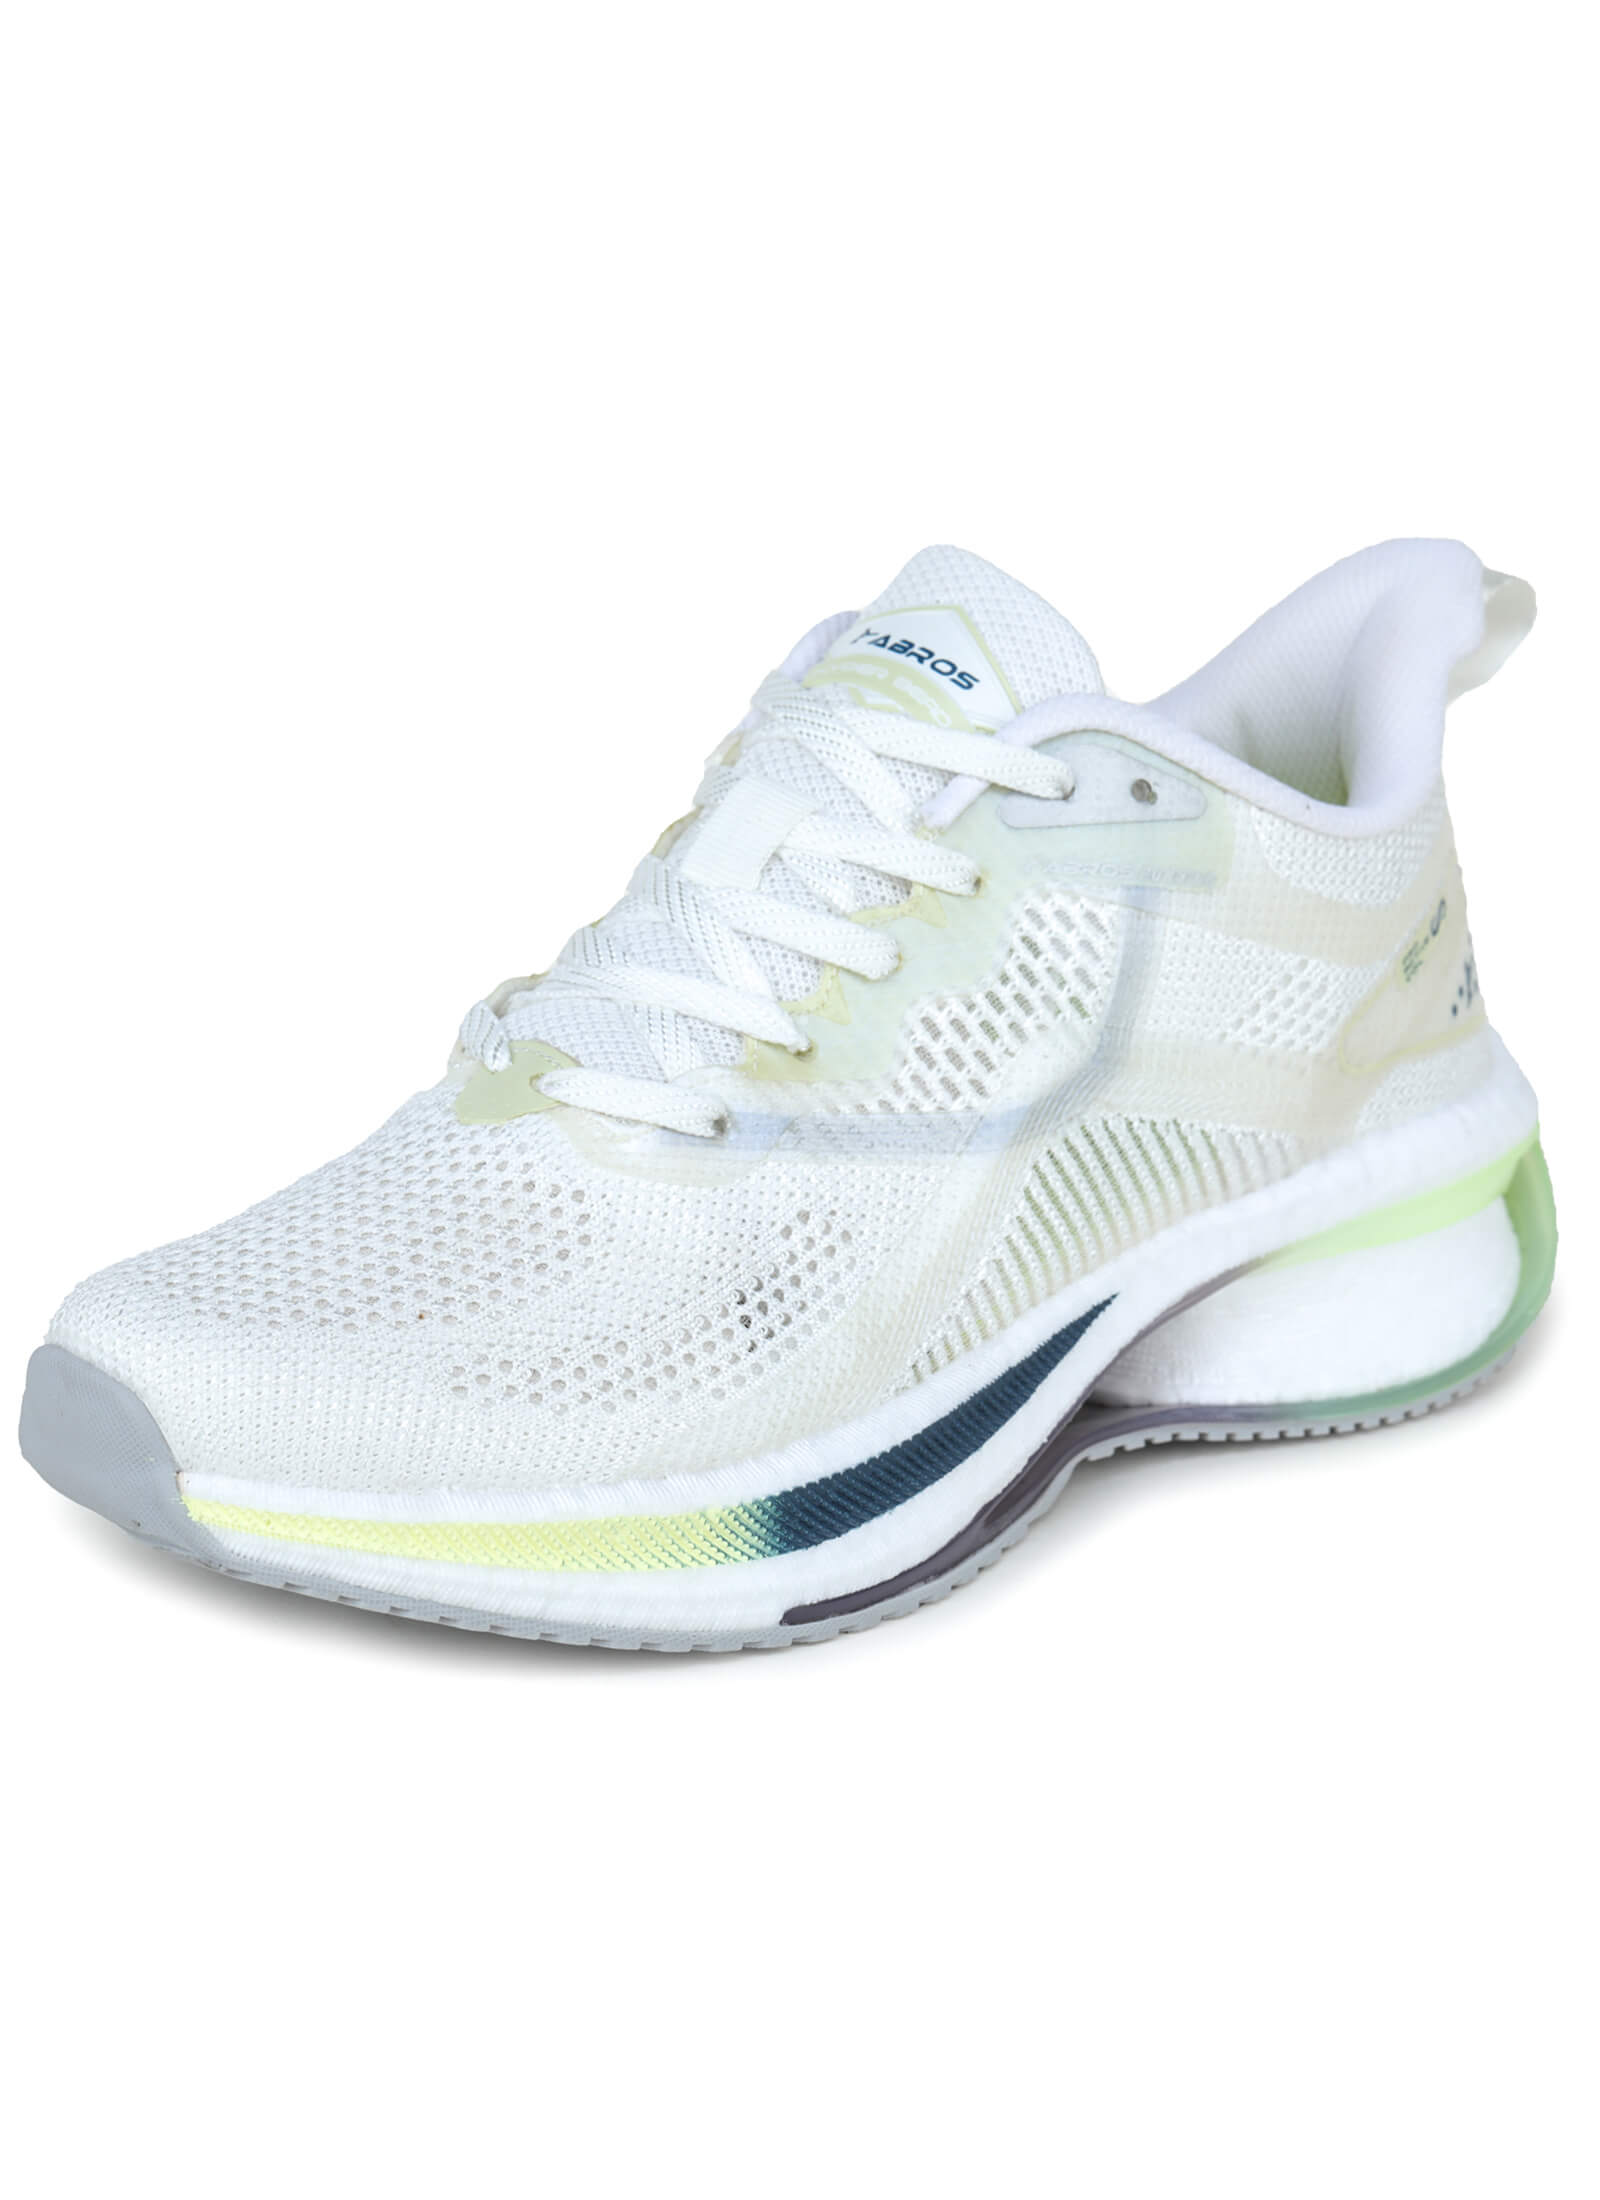 Super Hyper Beads Sports Shoes for Men